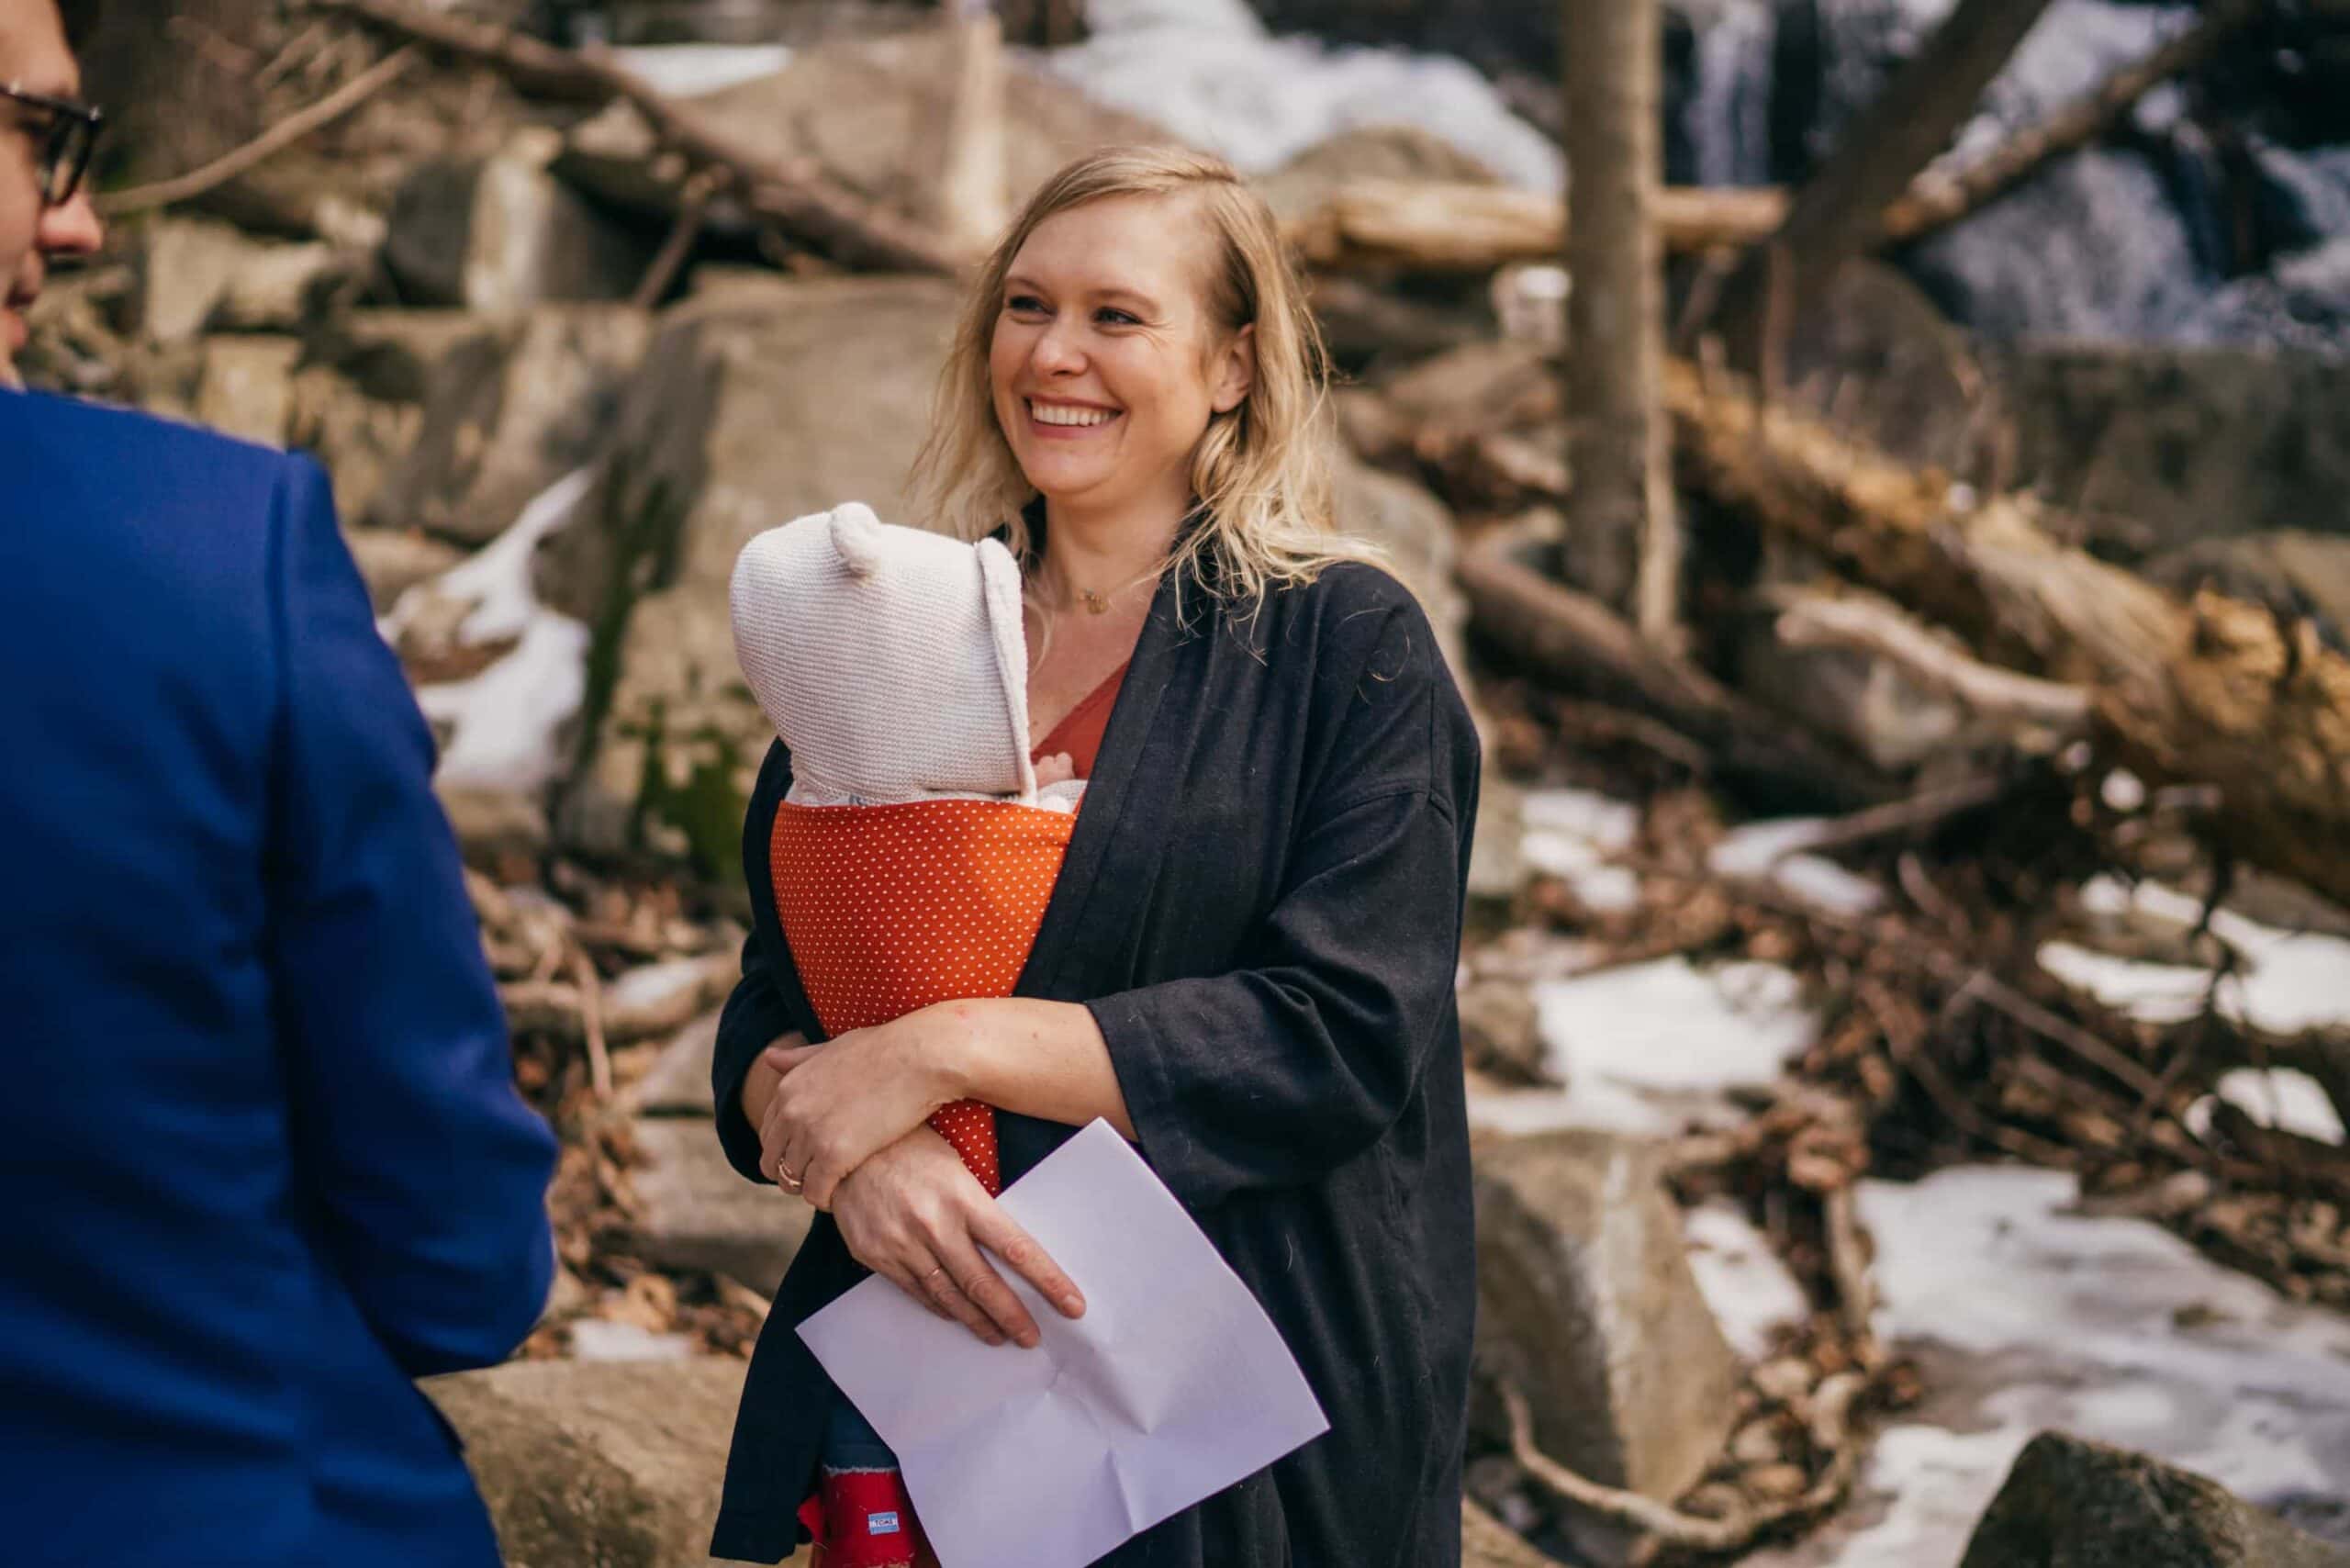 Wedding officiant with baby strapped to her smiles at wedding couple in winter Hudson Valley forest.